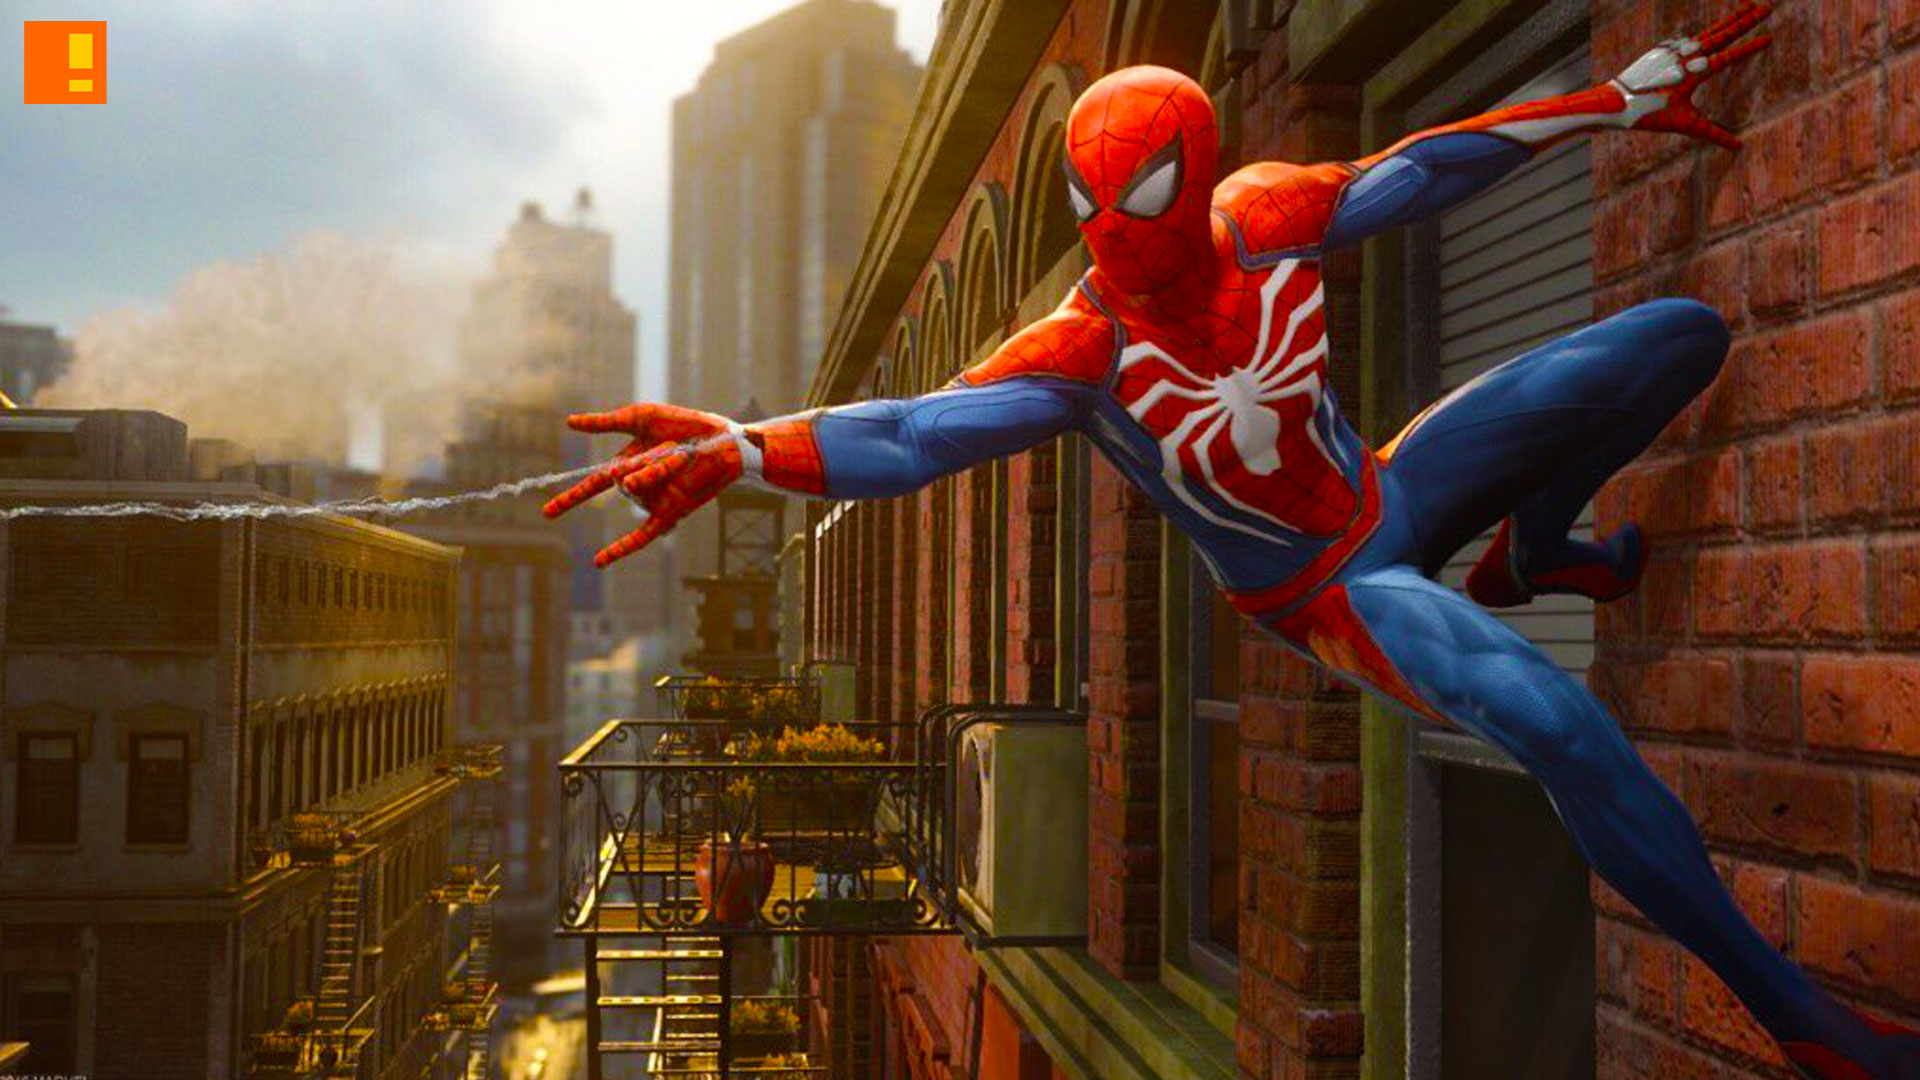 spider-man, ps4, sony , playstation, marvel, the action pixel, peter parker, entertainment on tap, the action pixel, @theactionpixel, e3, e3 2016, e3 trailer, trailer, teaser, insomniac games,